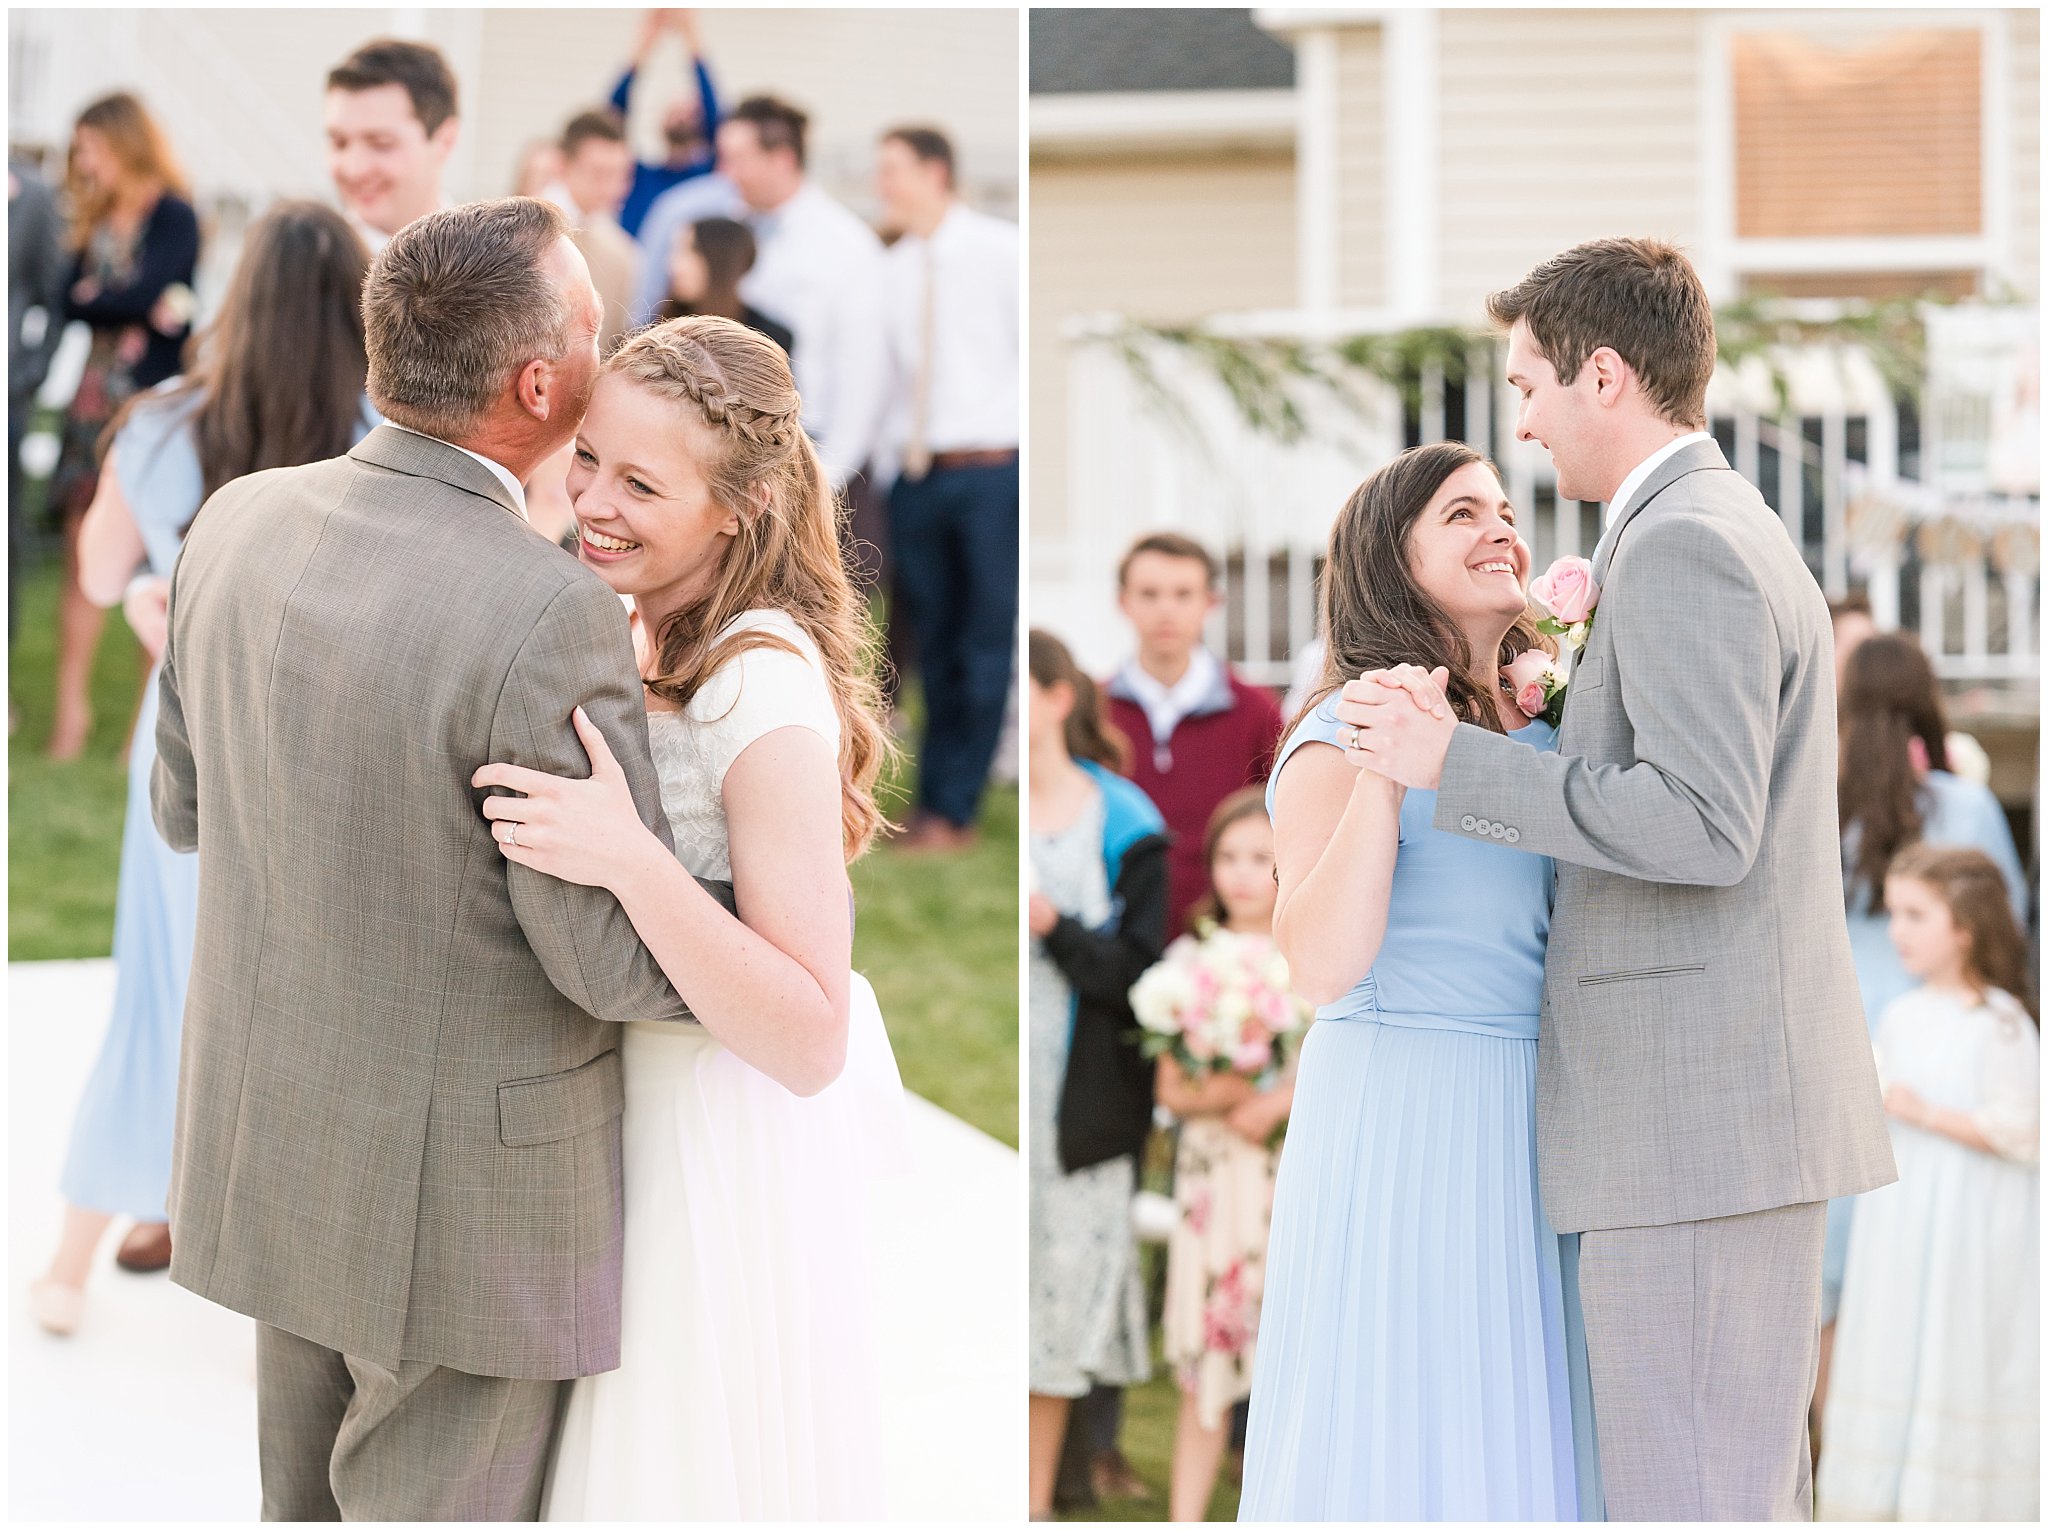 Father daughter dance, mother son dance | Backyard outdoor spring wedding with grey, blush, and light blue wedding colors | Spring Provo City Center Temple Wedding | Utah Wedding Photographers | Jessie and Dallin Photography